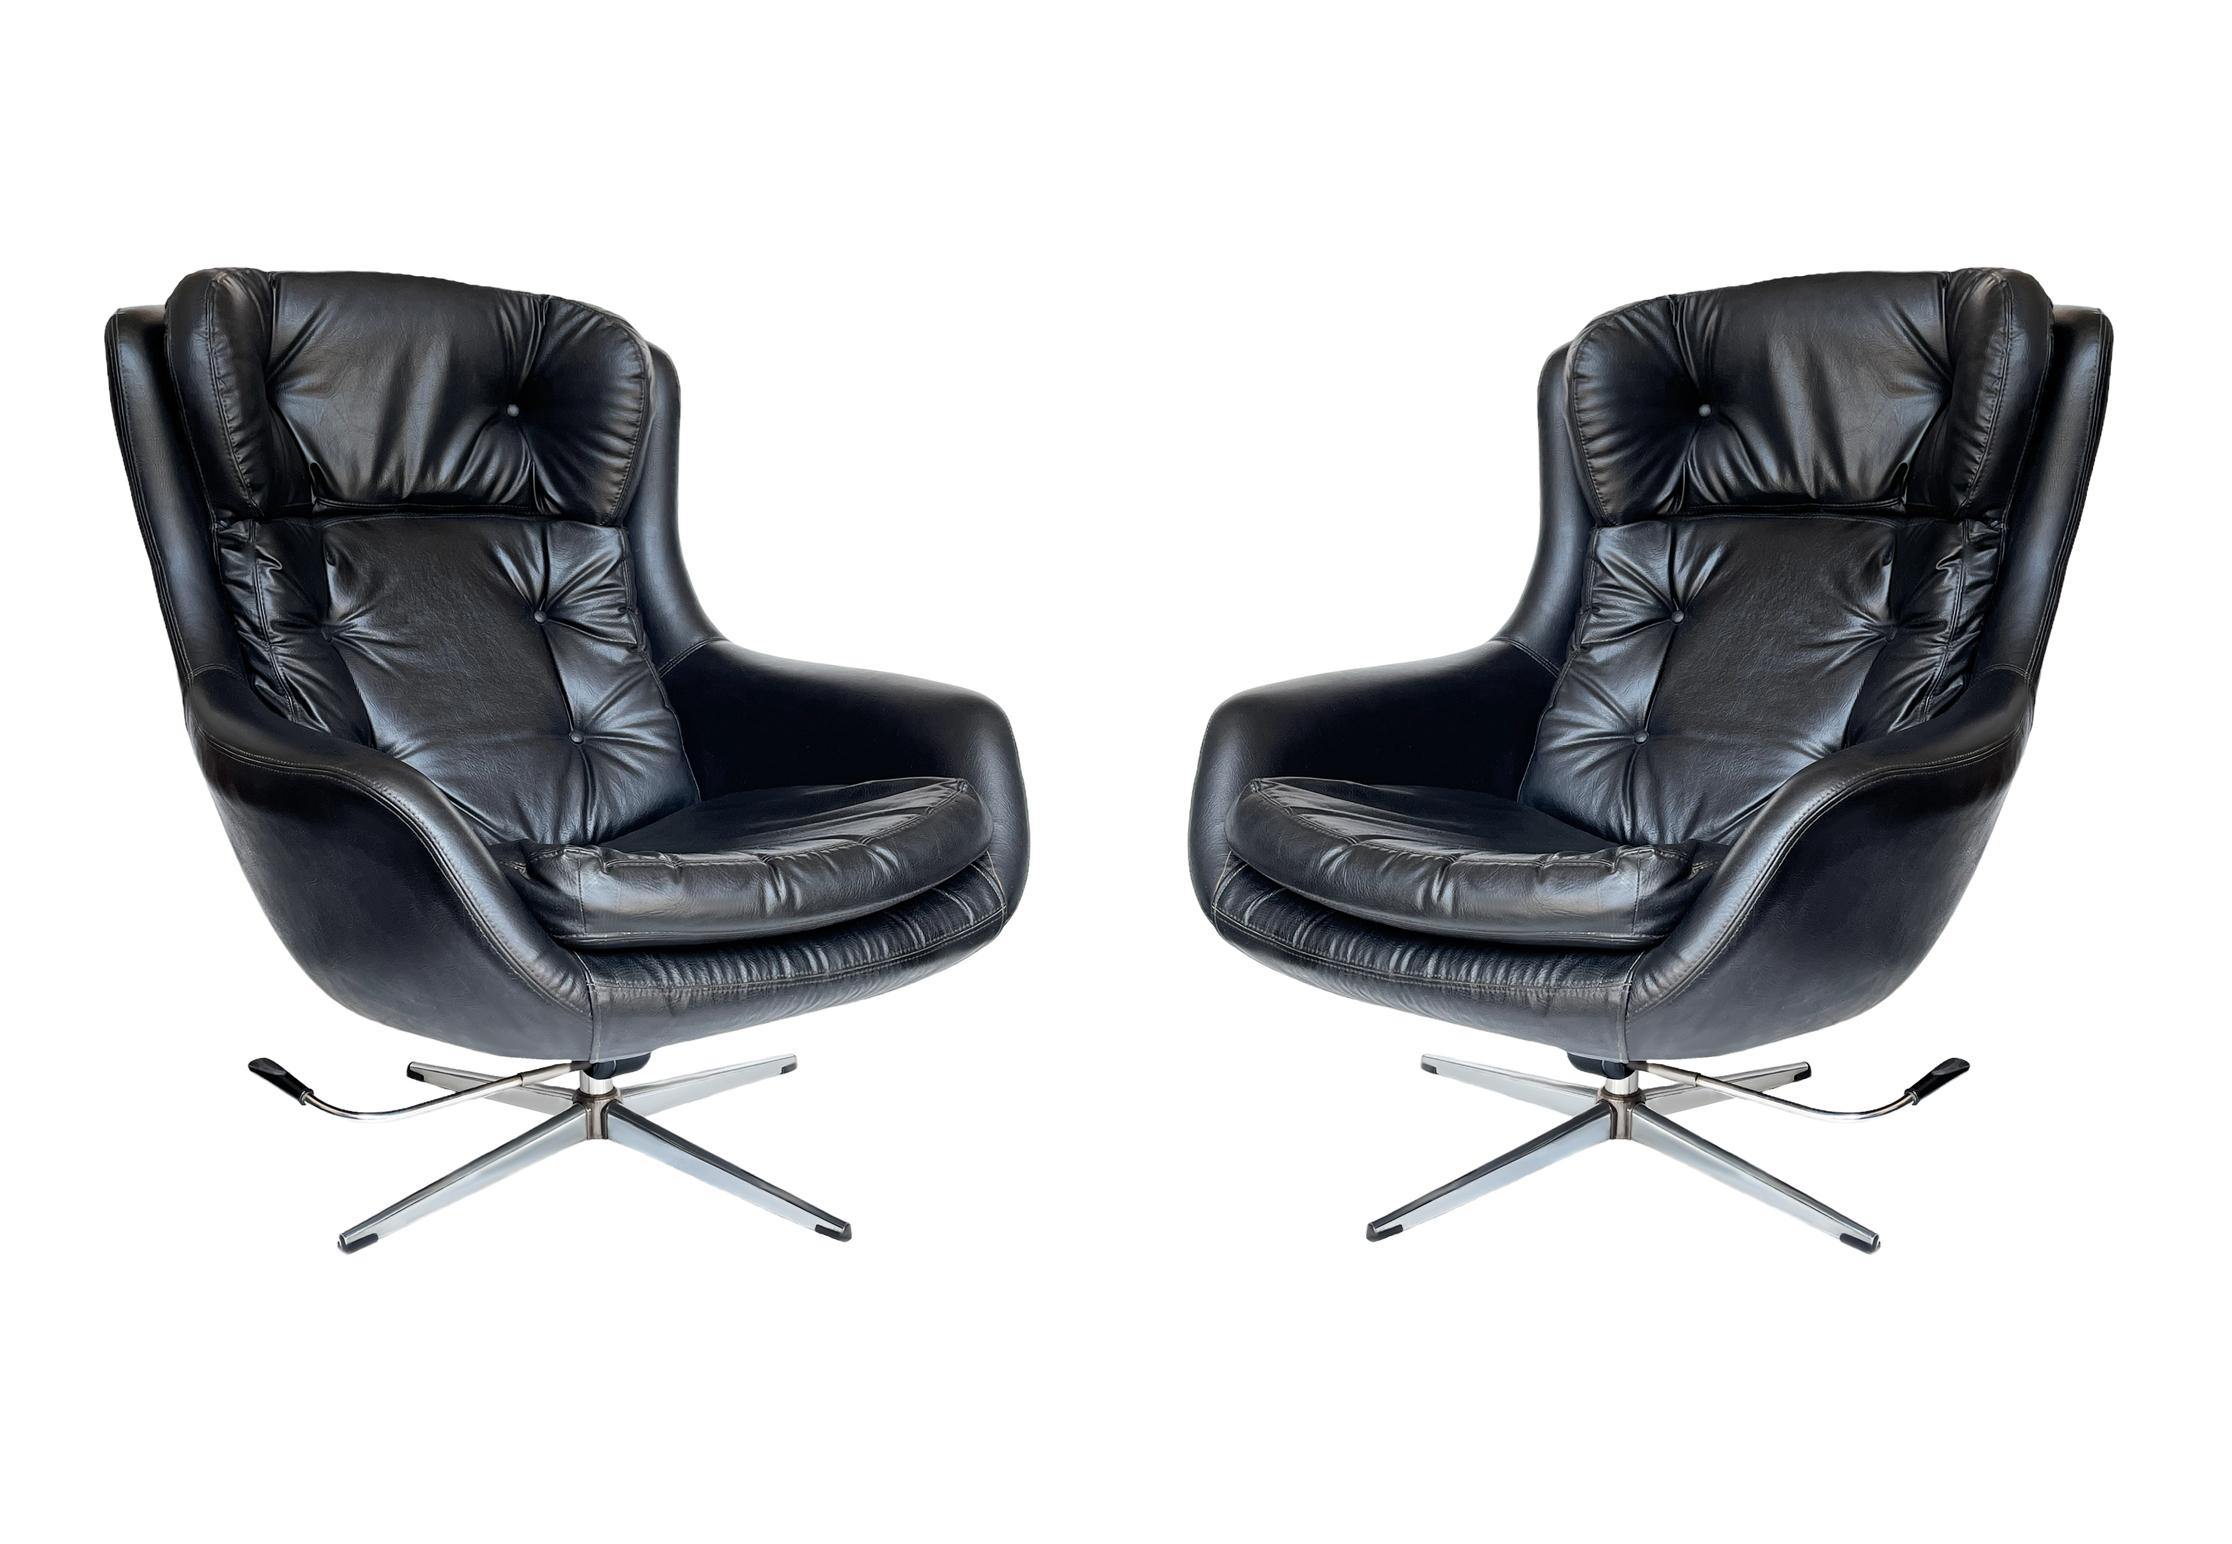 Steel Pair of Mid Century Modern Black Swivel Lounge Chairs by Overman Sweden  For Sale